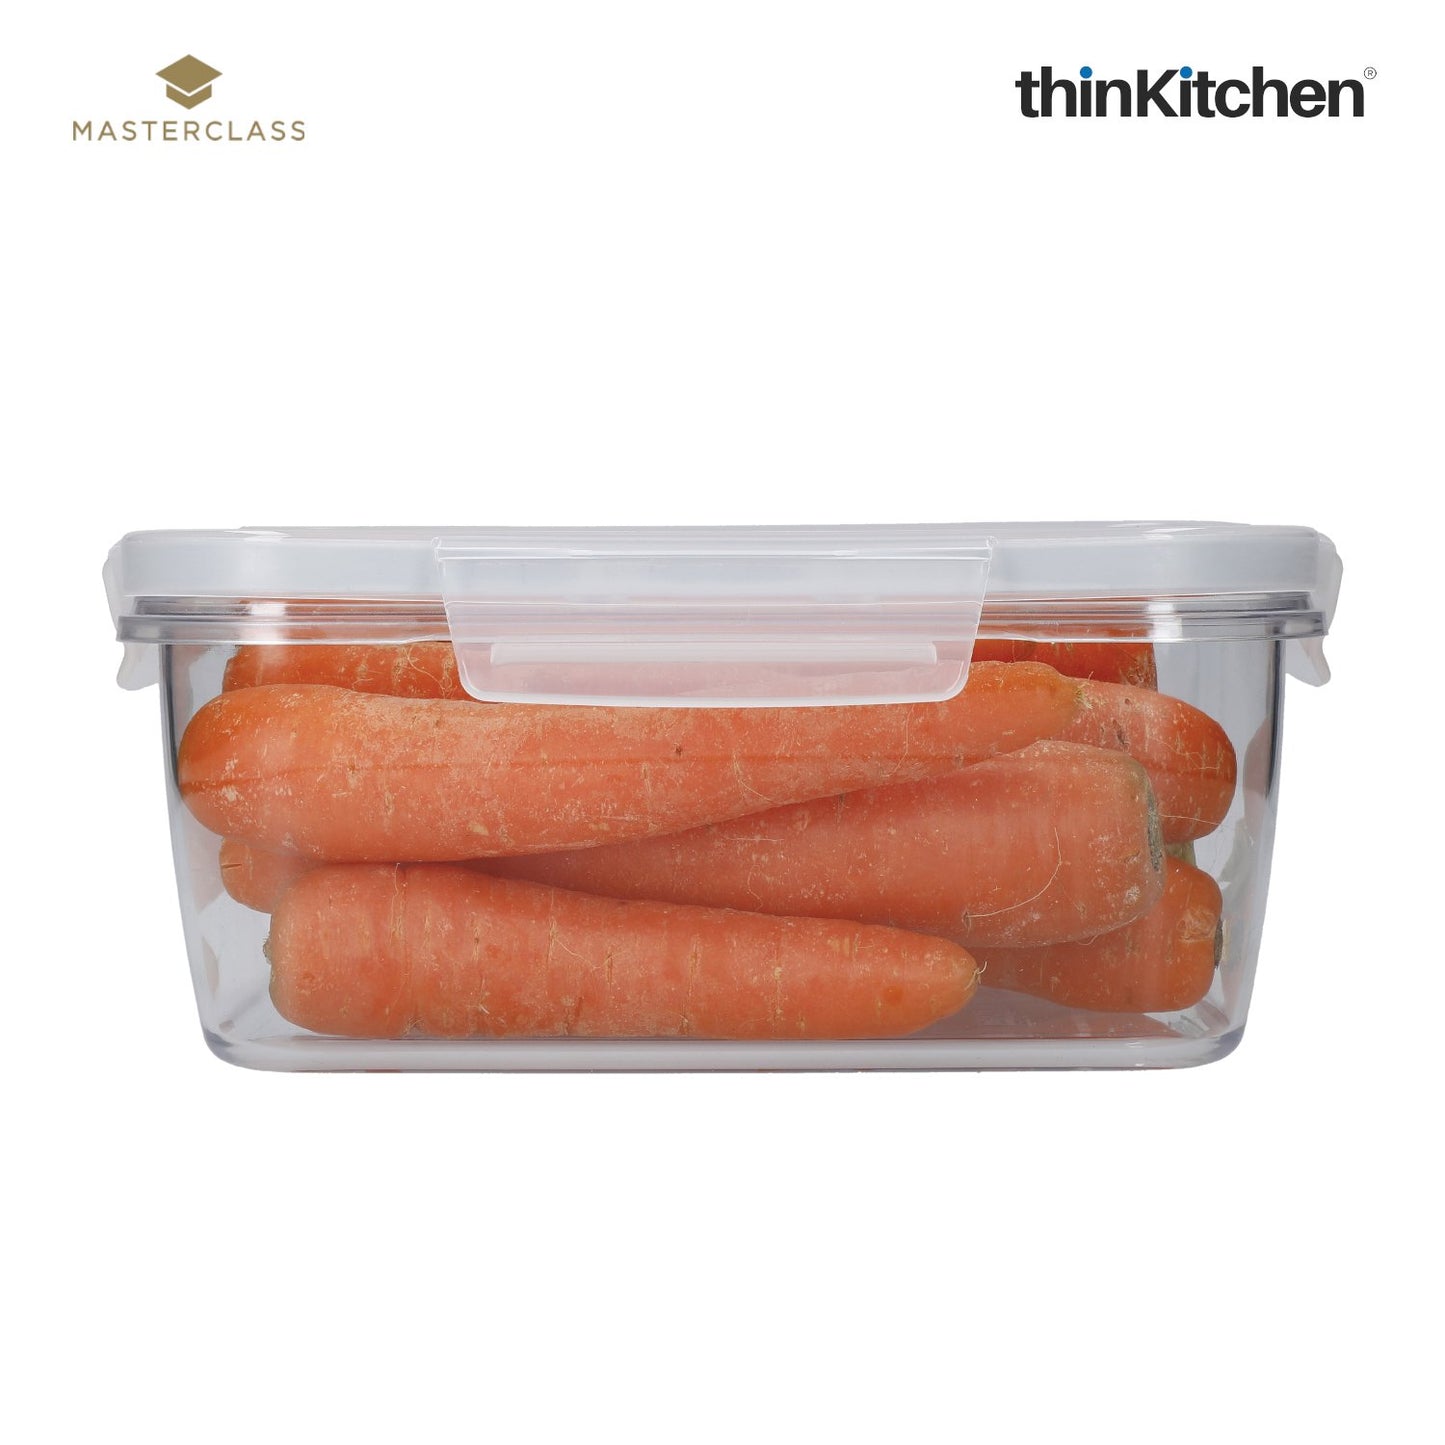 Masterclass Recycled Eco Snap Food Storage Container Rectangular 1500ml